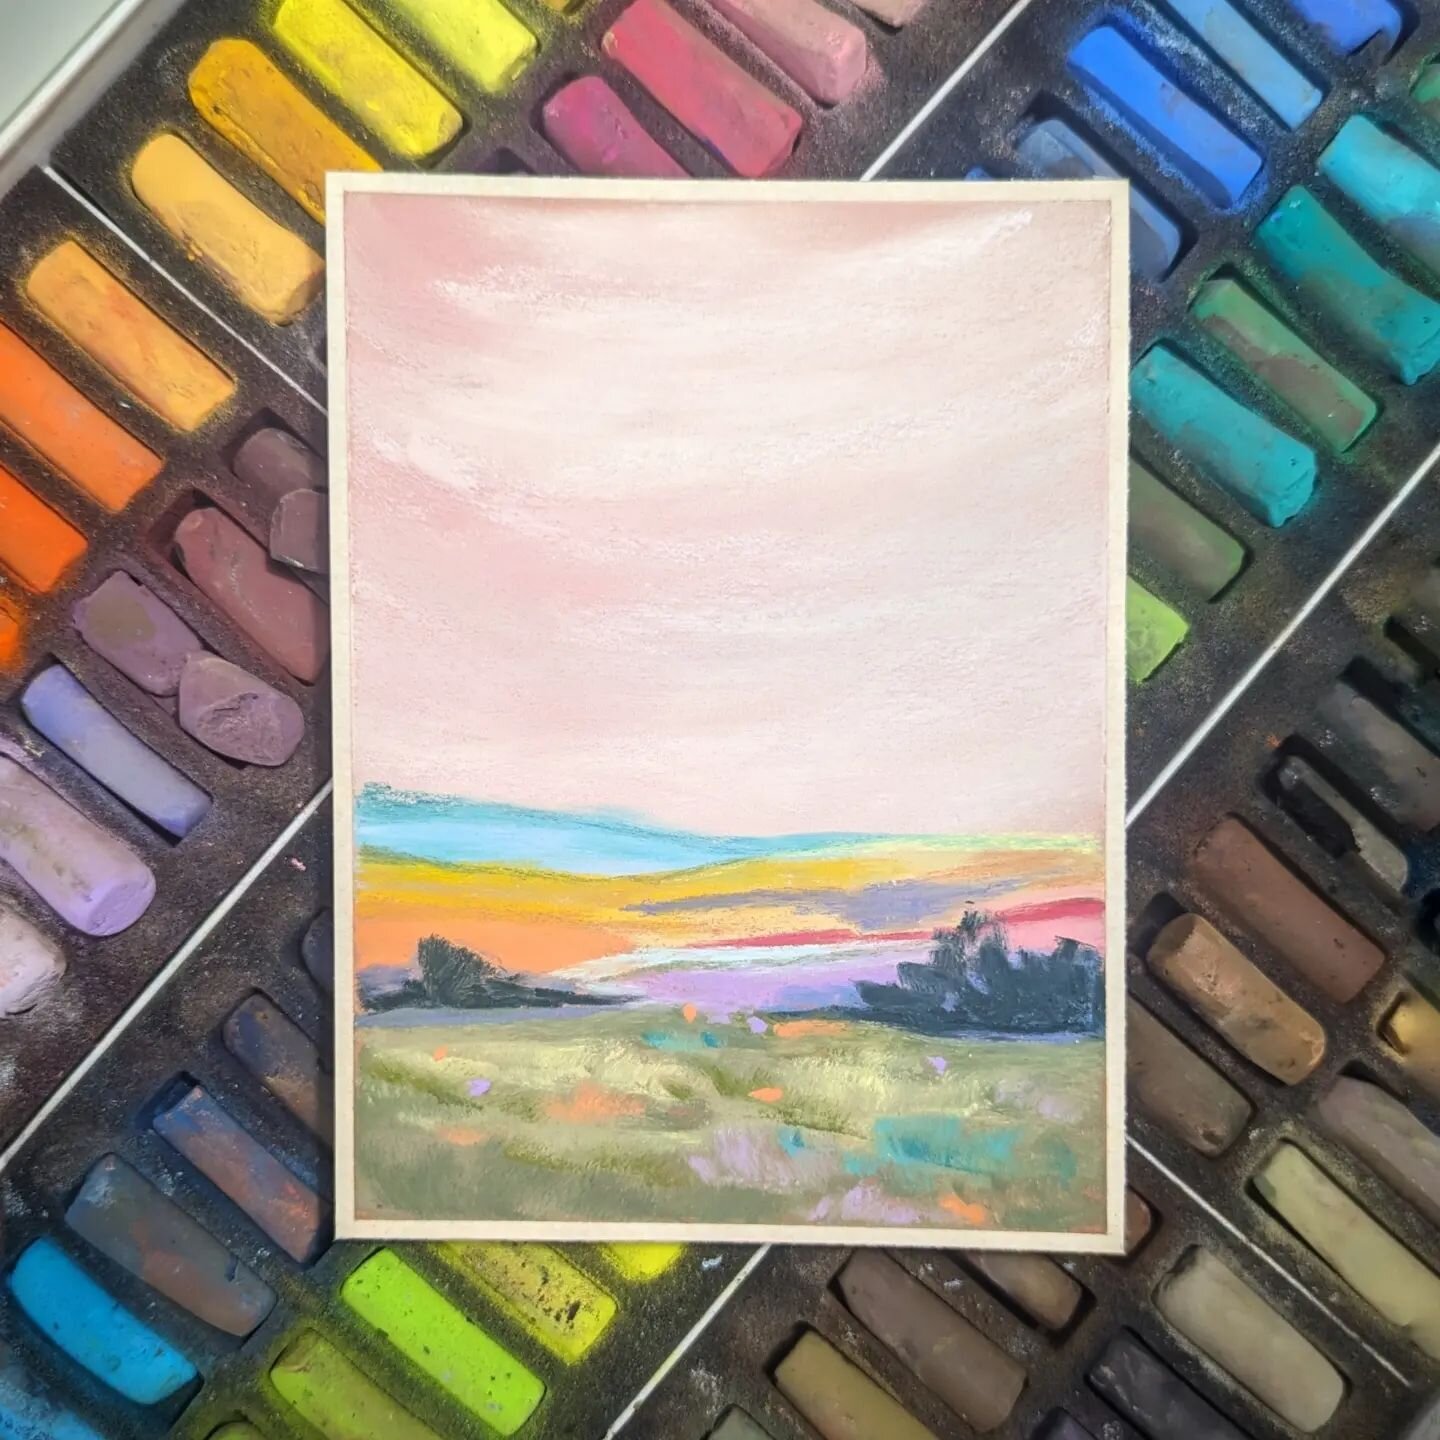 I'm having fun playing with the brighter side of my palette!!
.
I'm noticing the more I heal the lighter and brighter colors are coming through in my art work. I'm excited and curious to see how my work continues to evolve. 
.
Soft pastels on sanded 